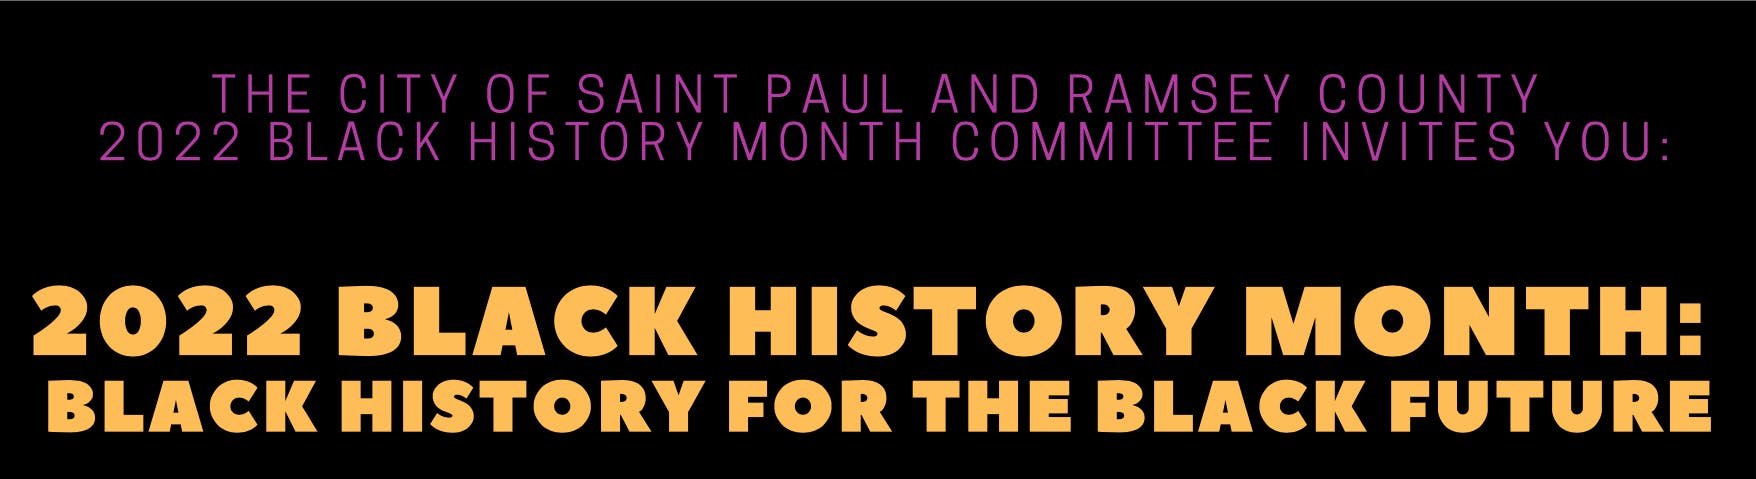 2022 Black History Month: Black History For The Black Future